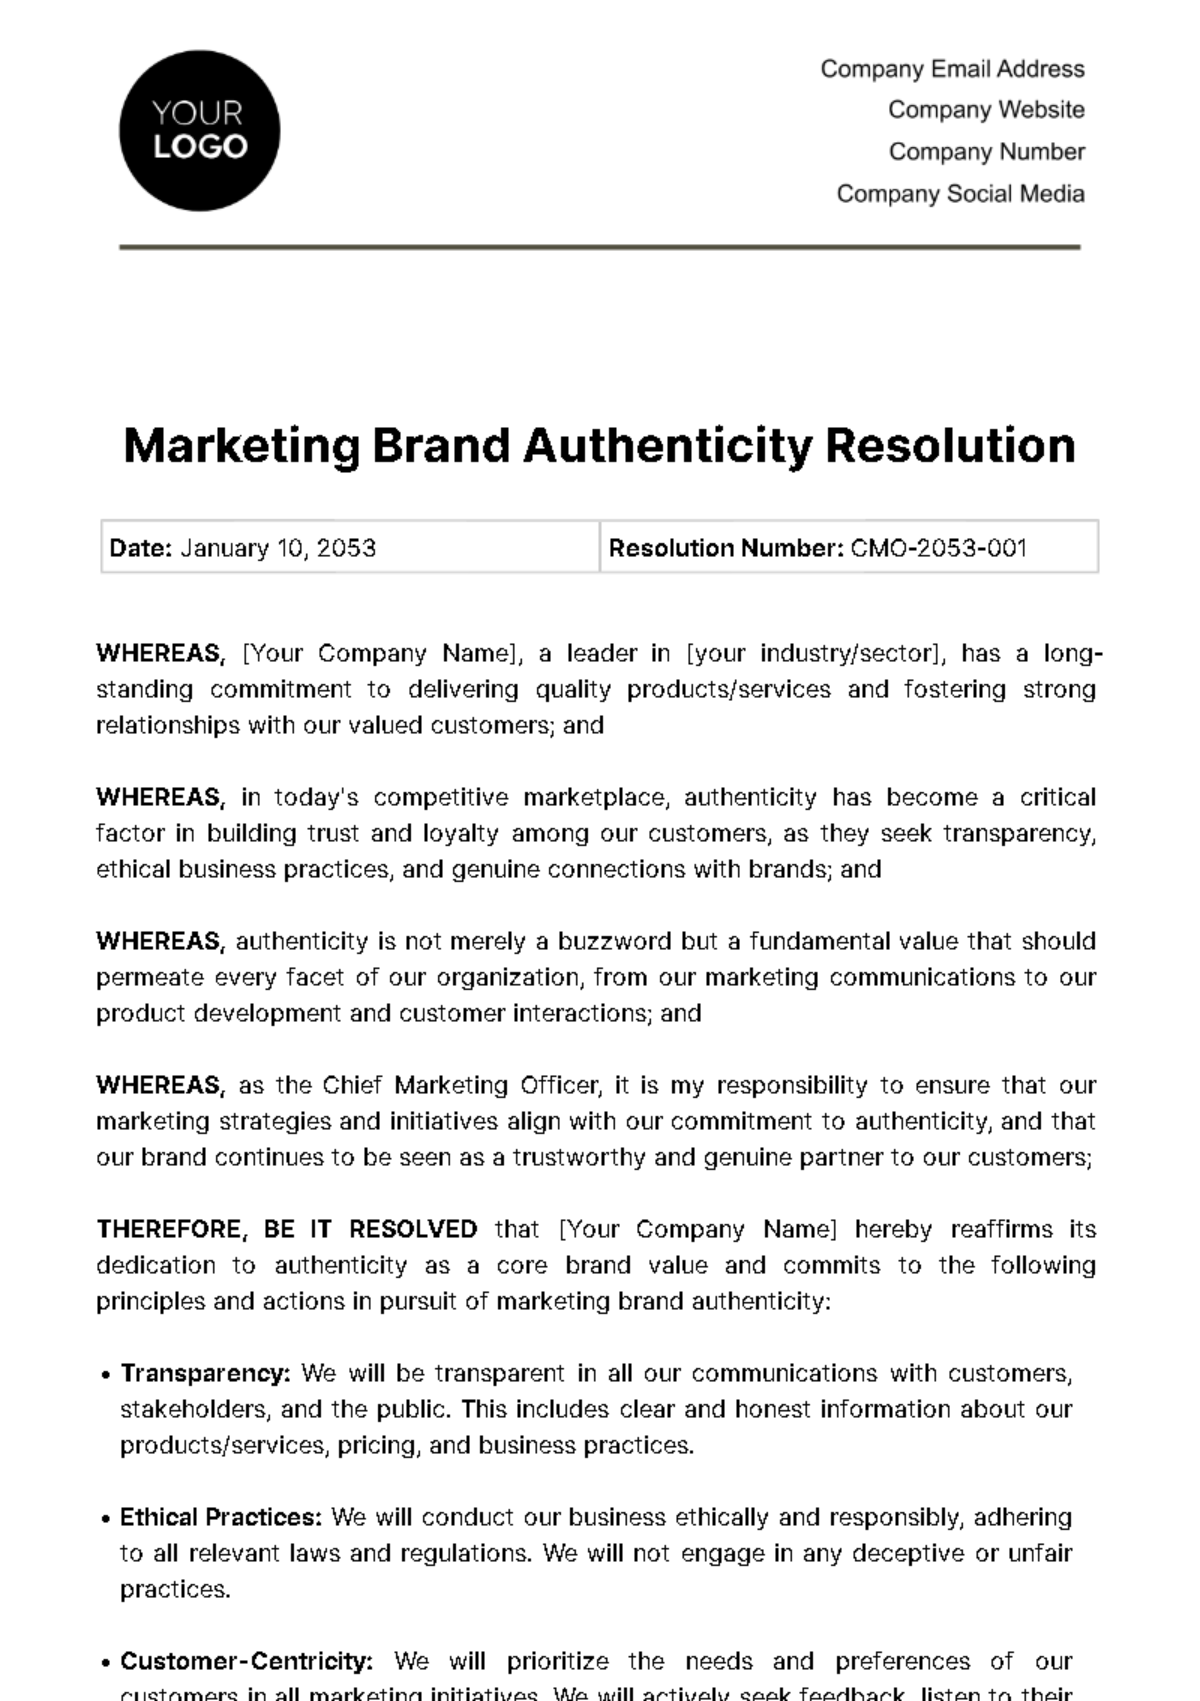 Free Marketing Brand Authenticity Resolution Template